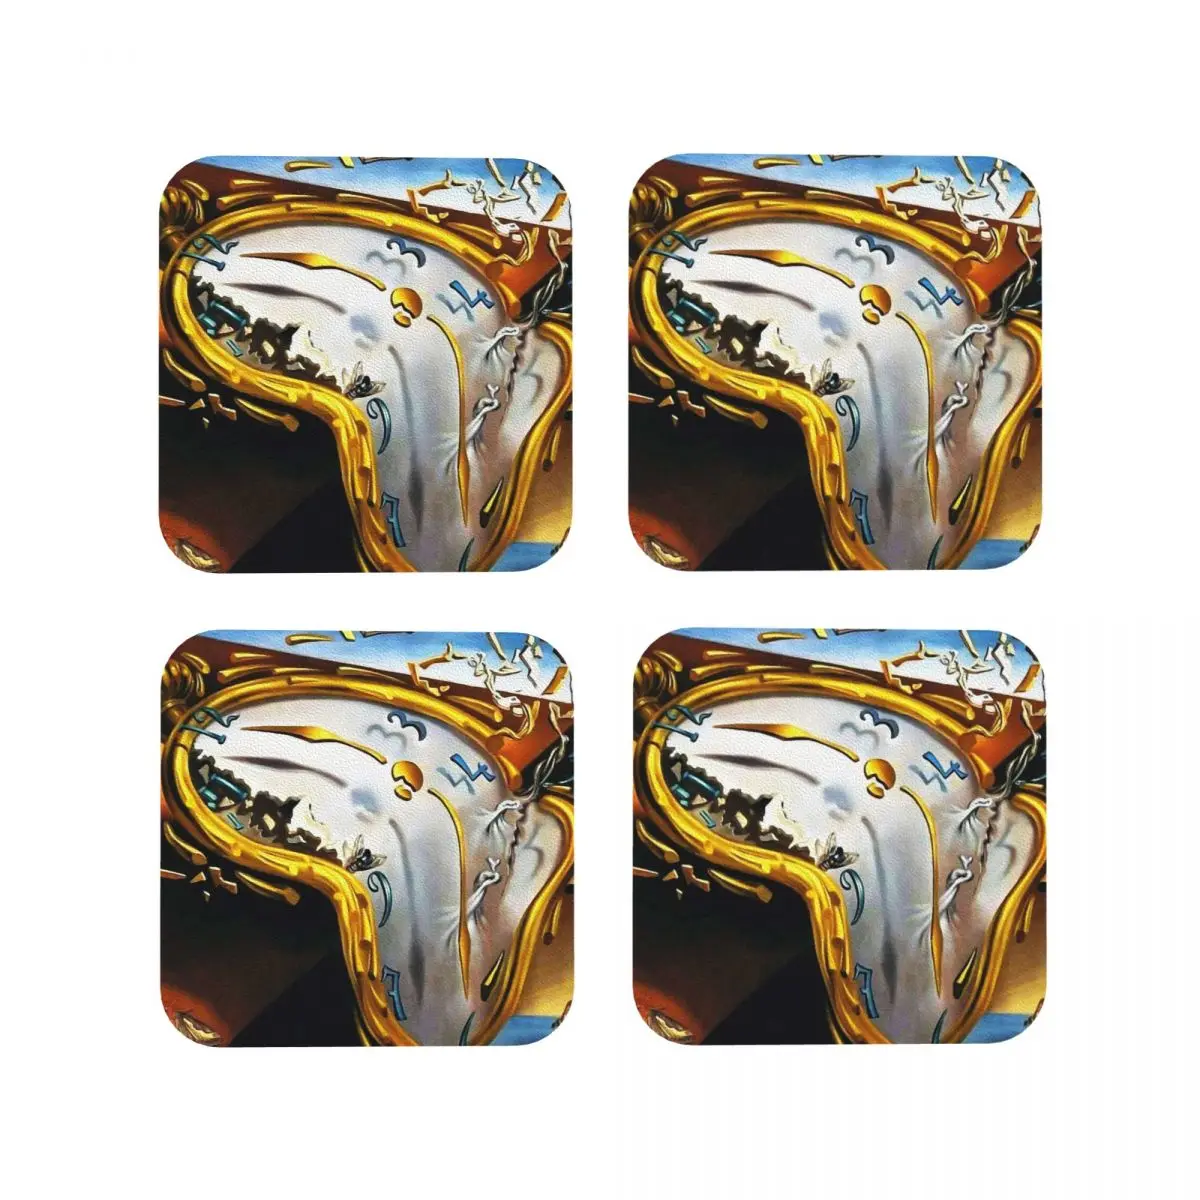 

Salvador Dali Coasters Decoration And Accessories For Table Utensils For Kitchen Placemats For Dinner Table Napkins Coffee Mat